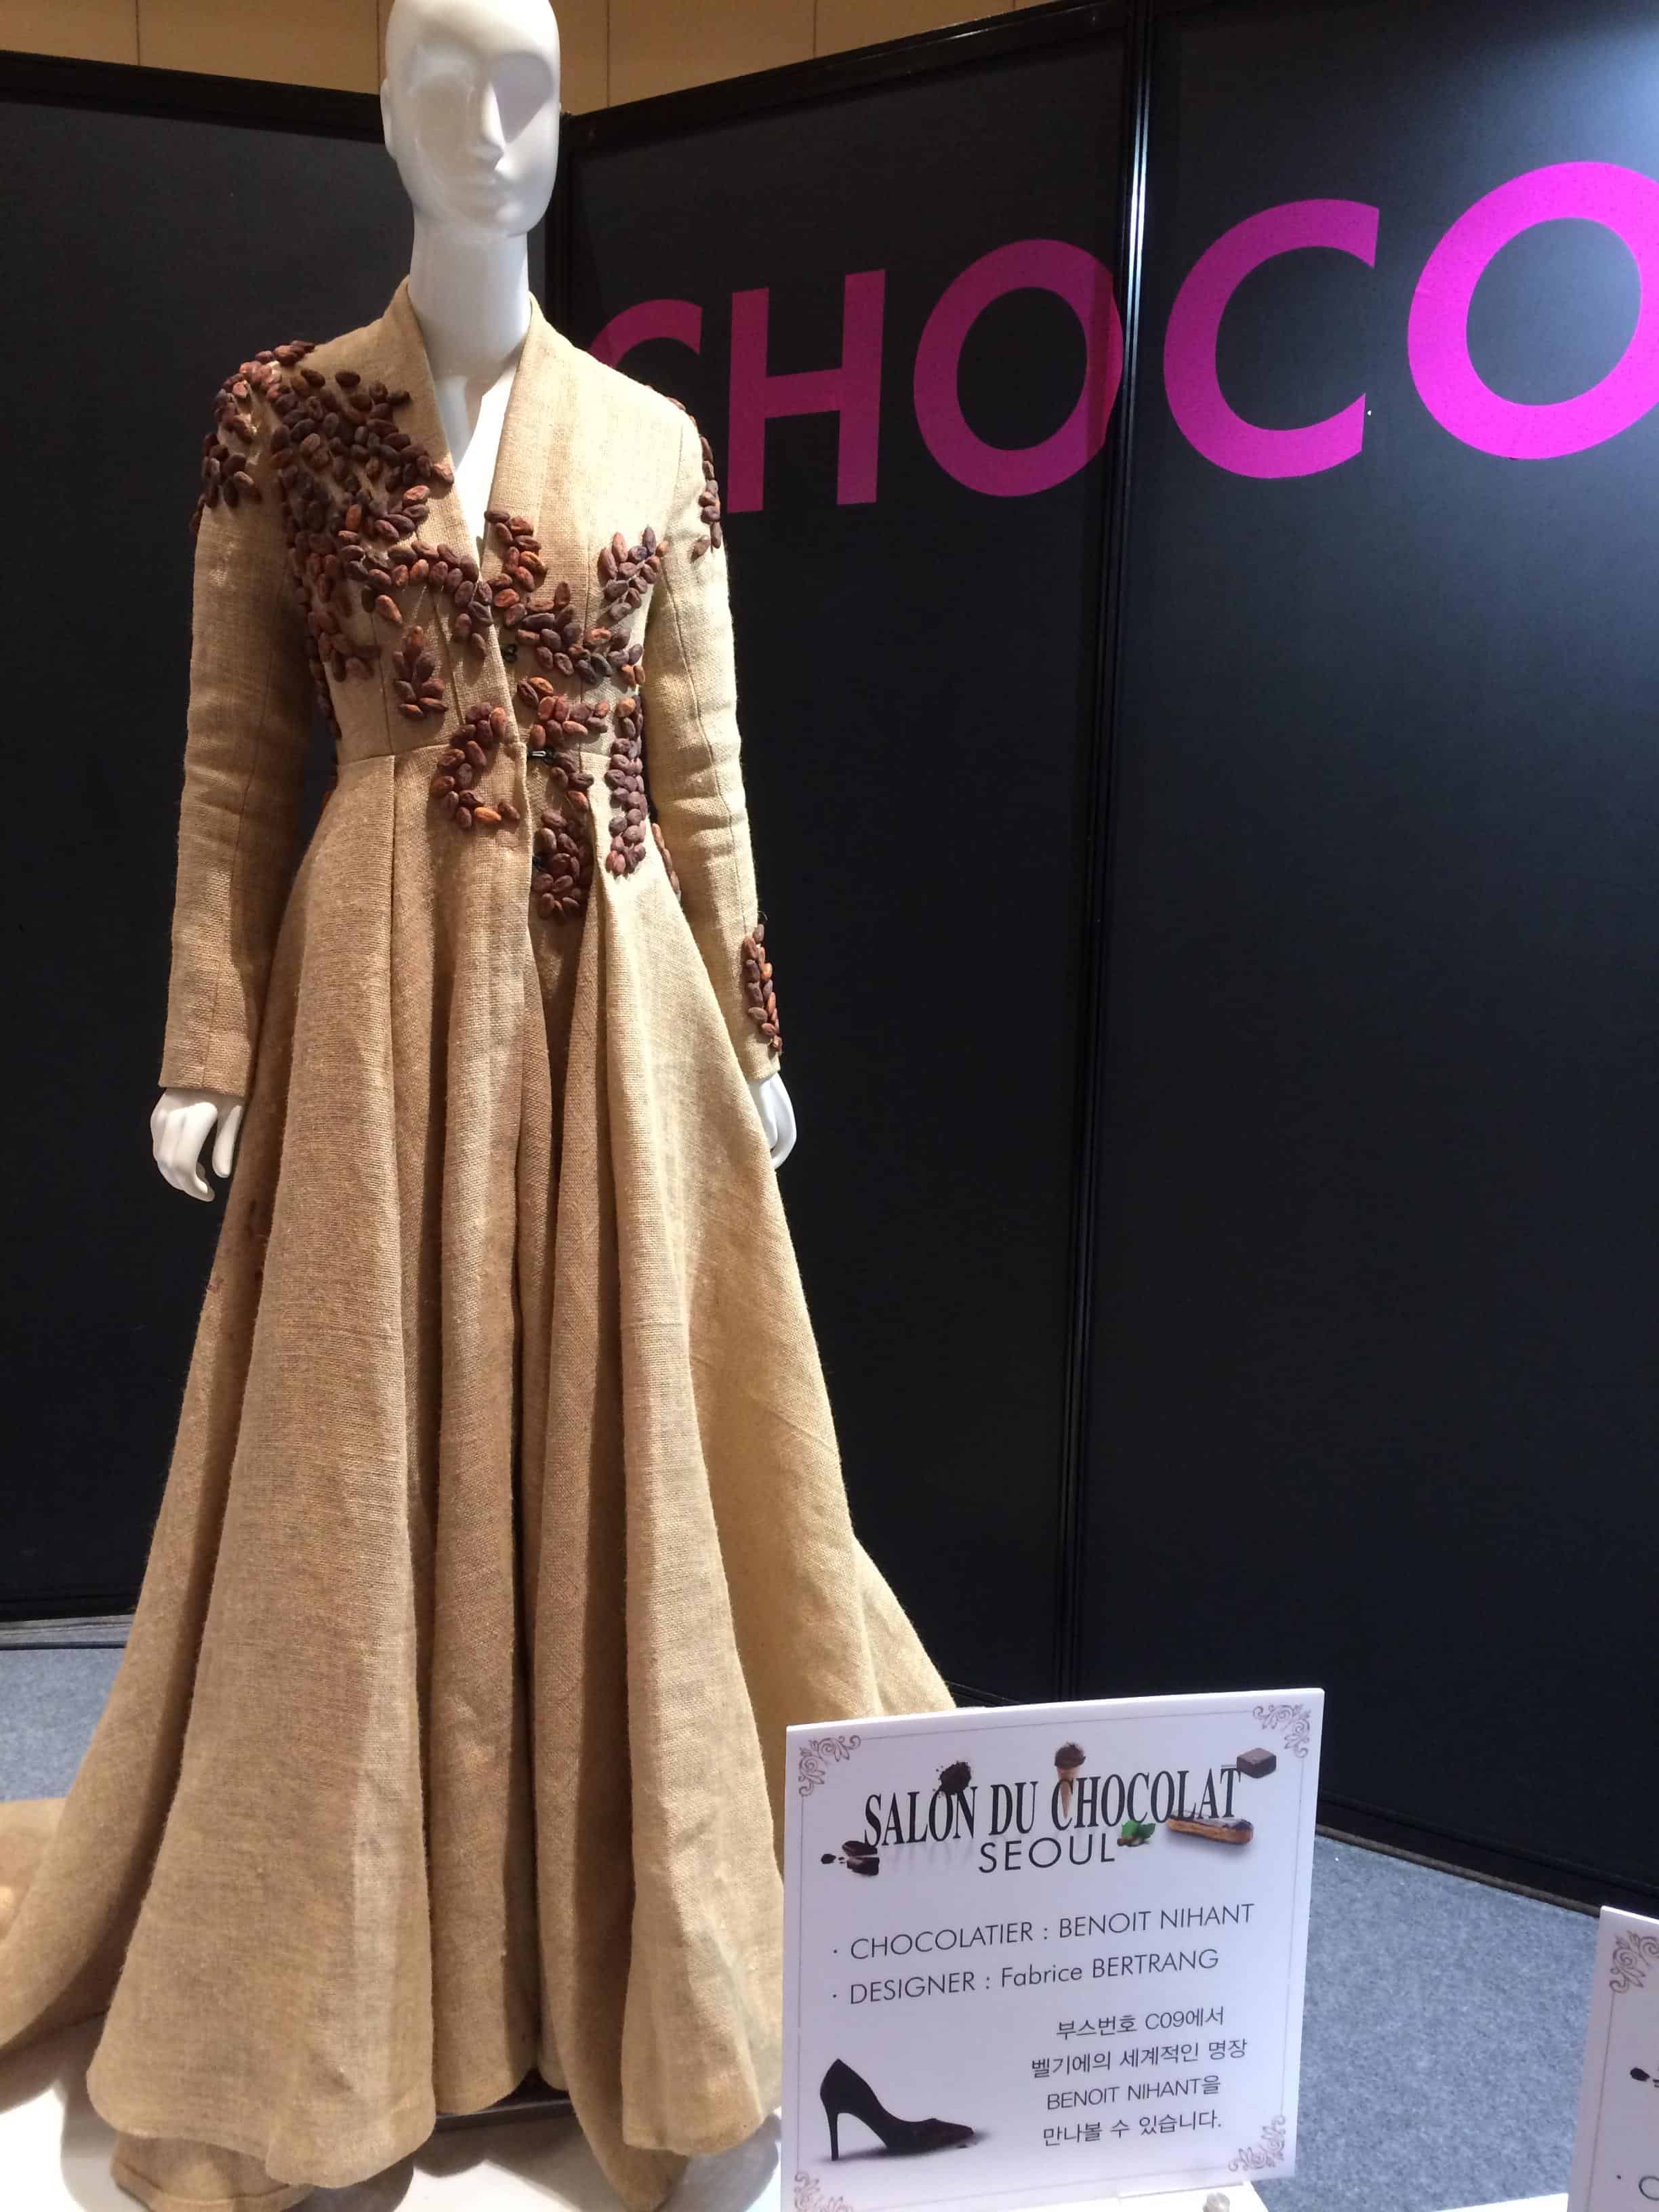 image of a mannequine in an empire-waist tan dress with cocoa beans affixed to the front.